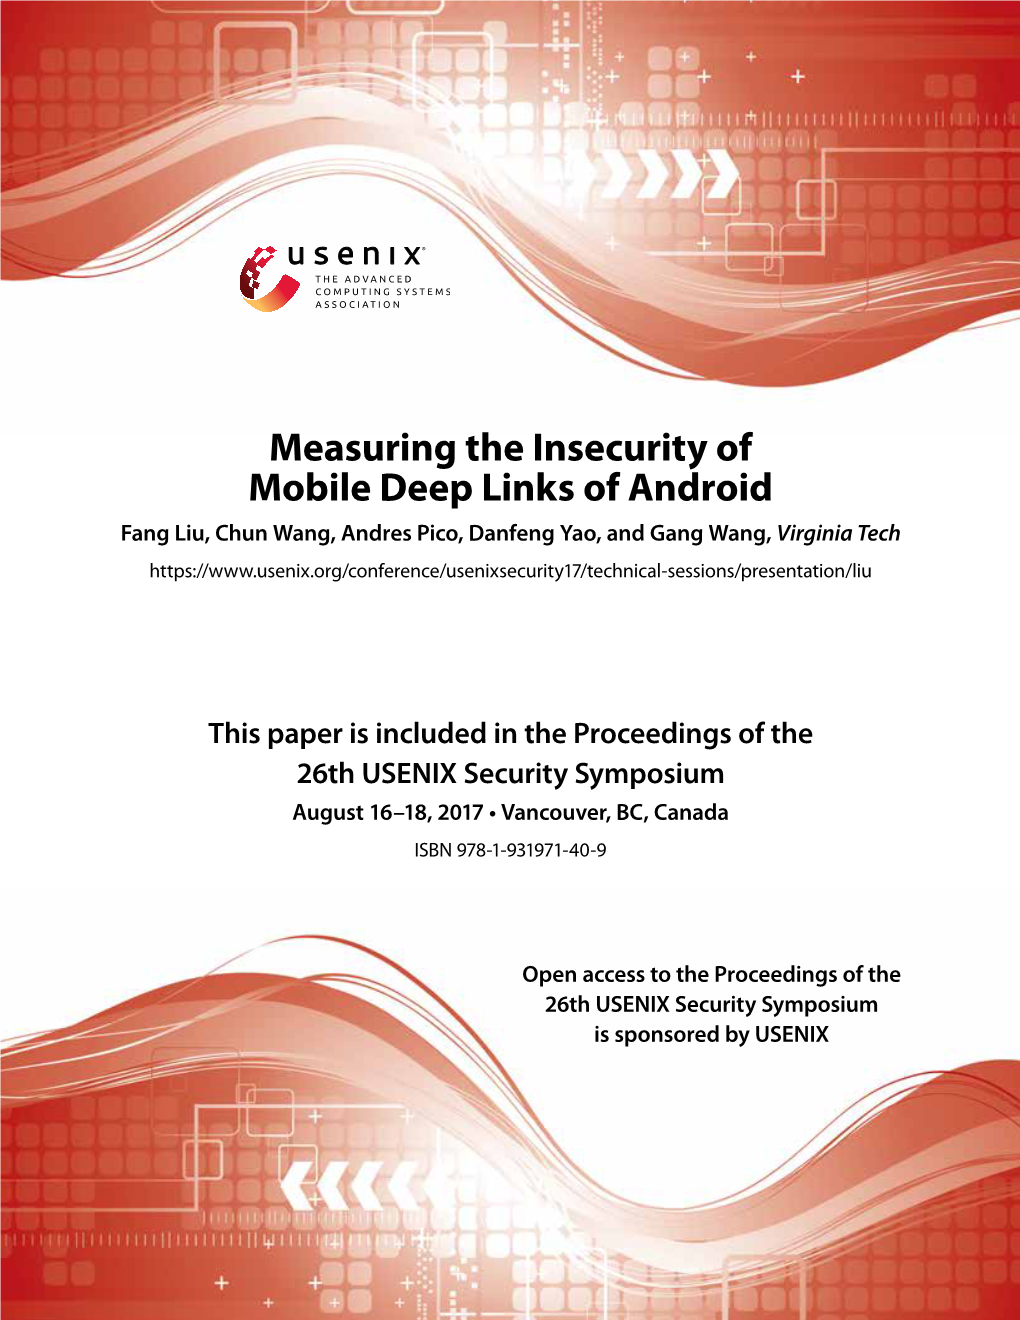 Measuring the Insecurity of Mobile Deep Links of Android